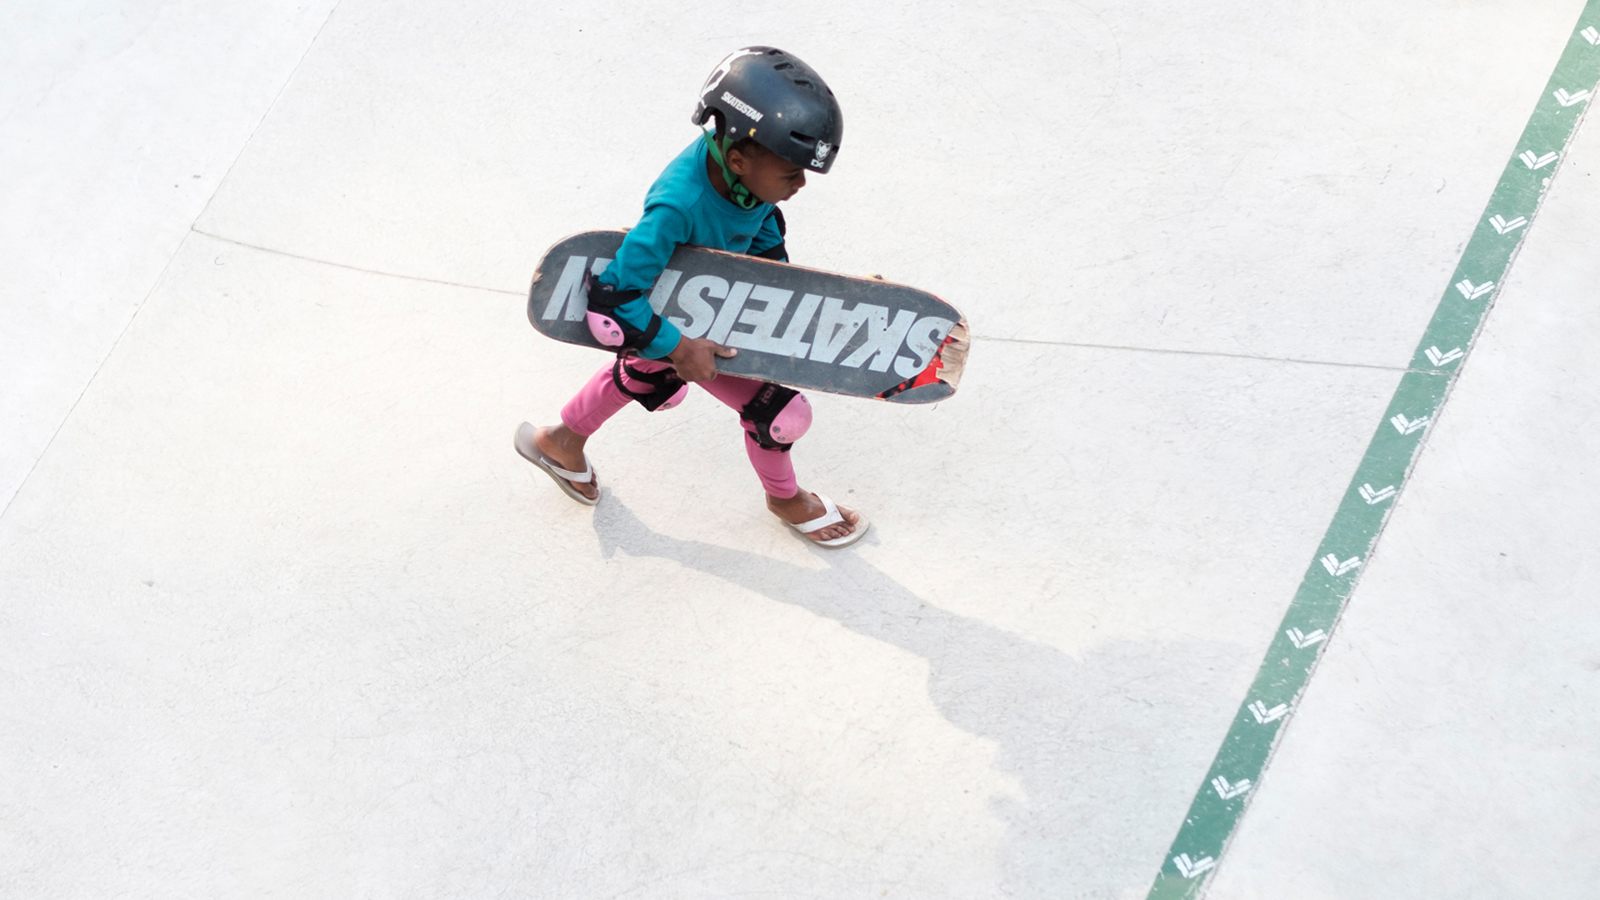 Vans Partners With Skateistan To Build & Support Skateboard